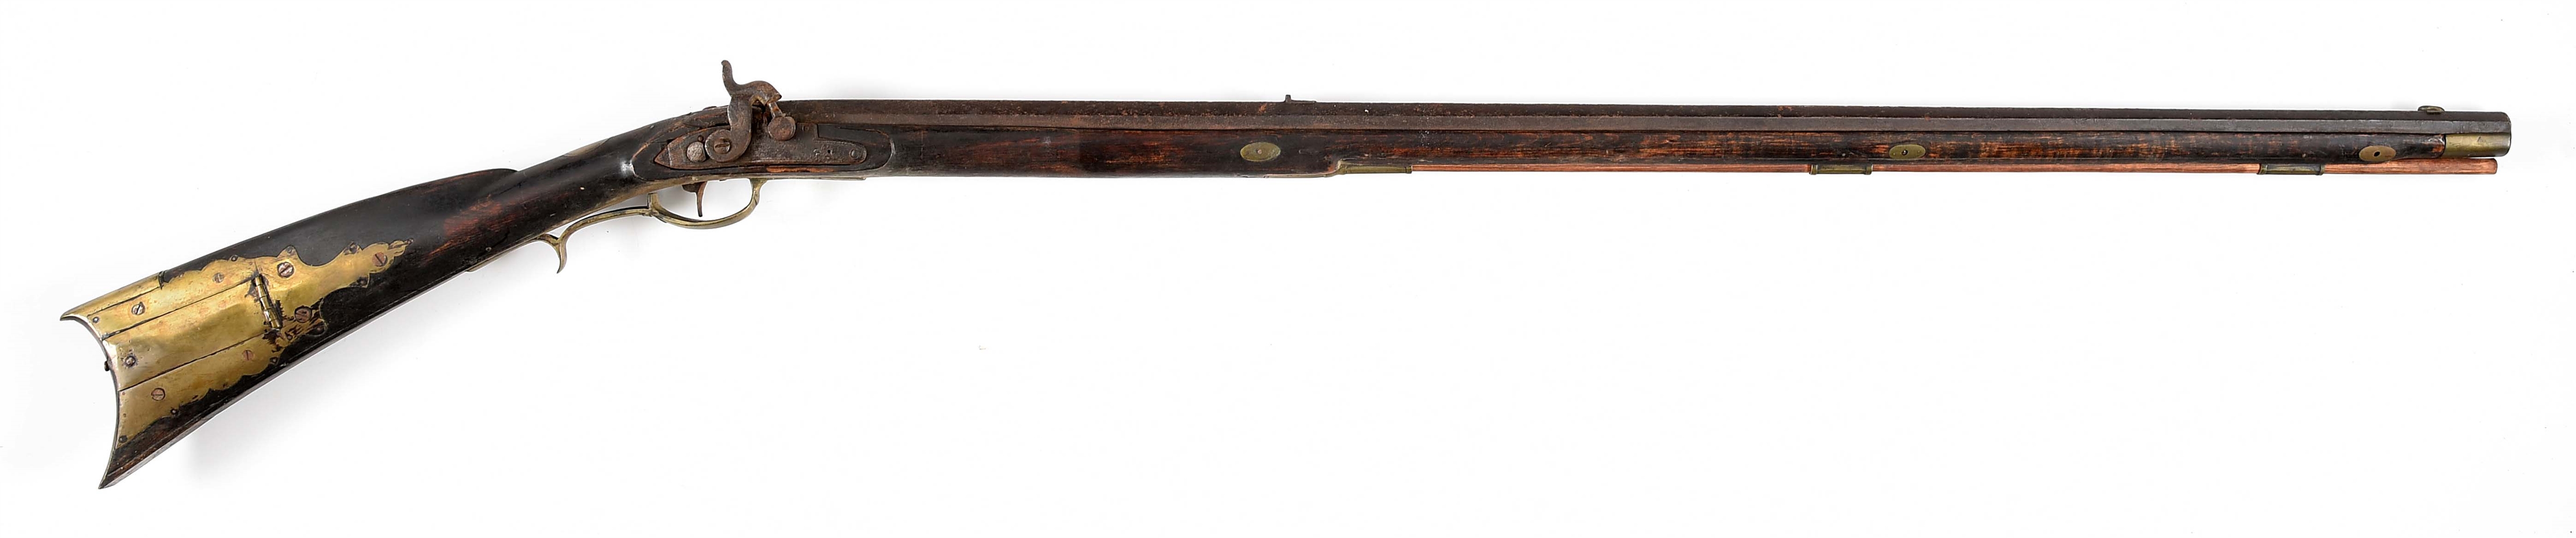 (A) PERCUSSION SMOOTHBORE RIFLE.